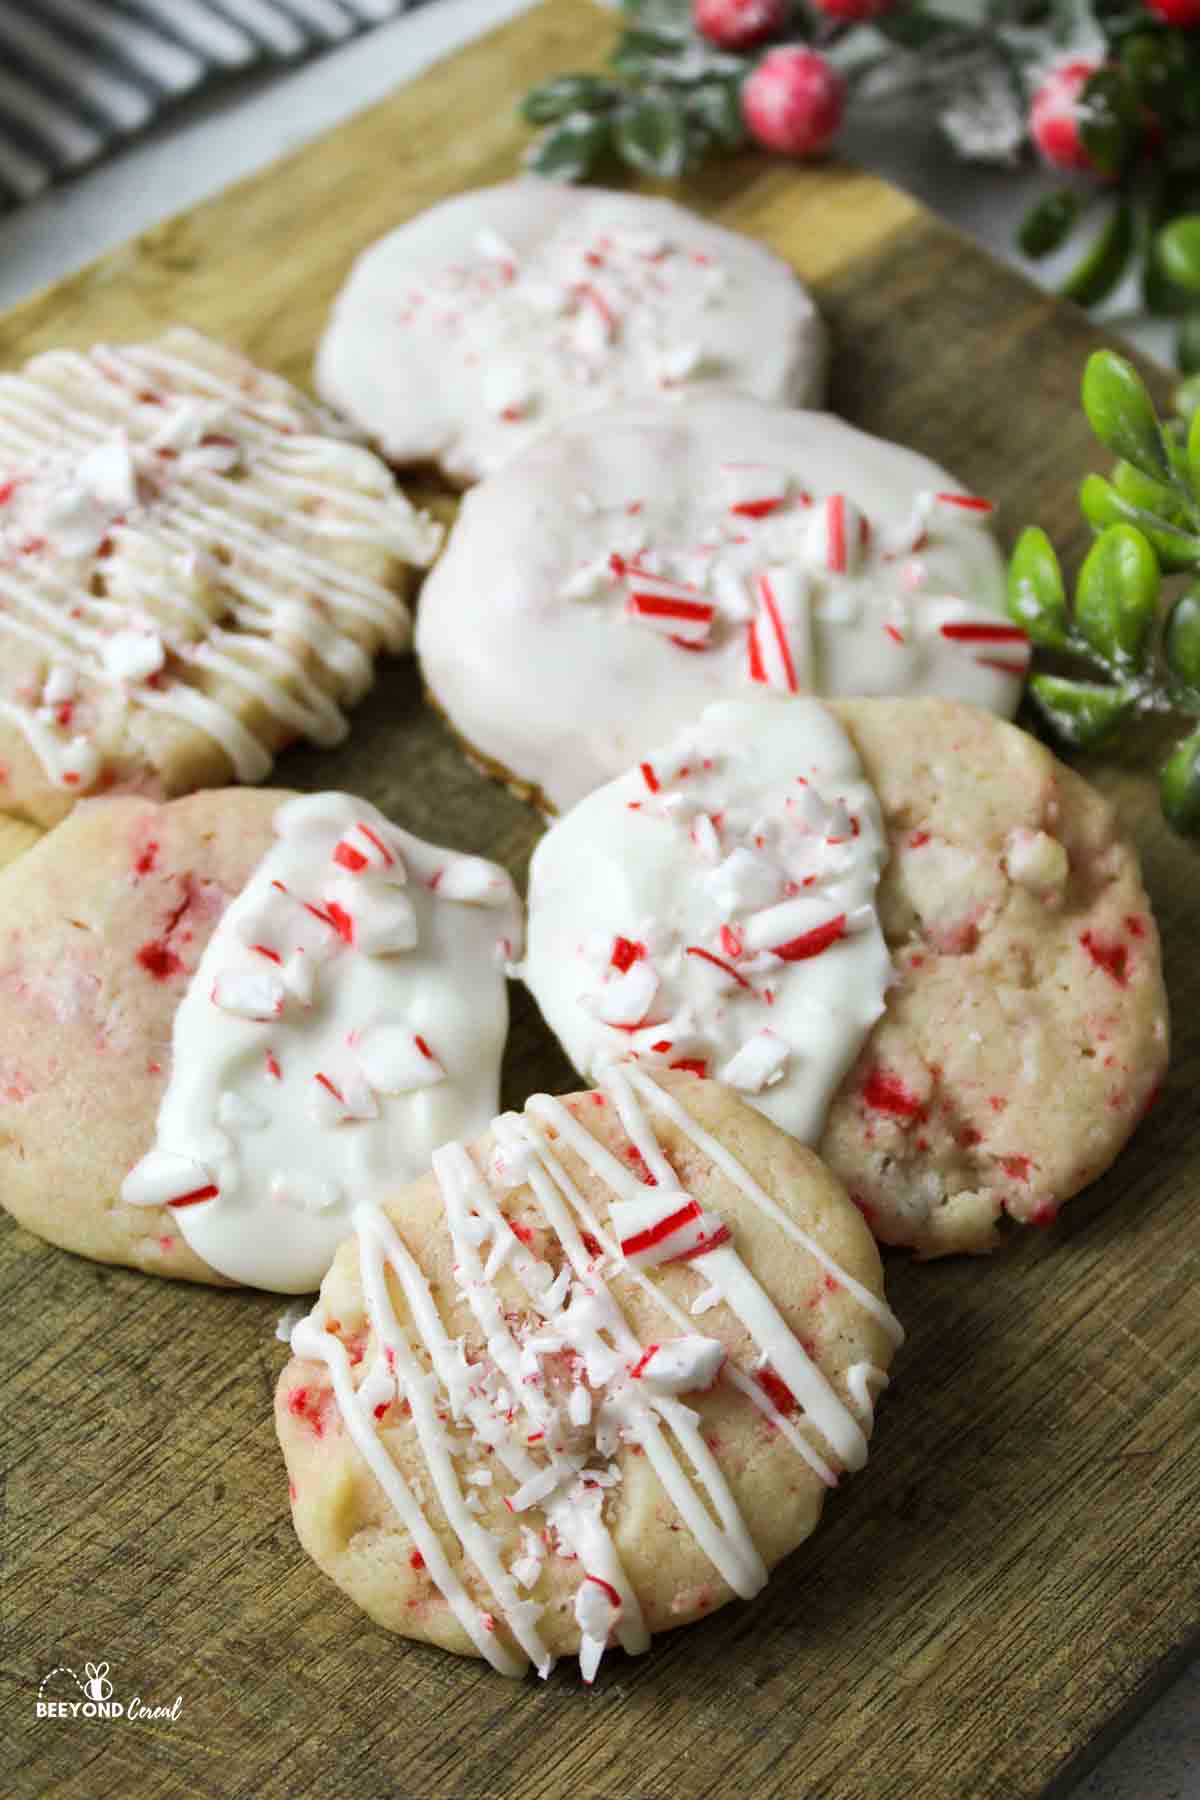 6 arranged peppermint shortbread cookies on a wooden surface